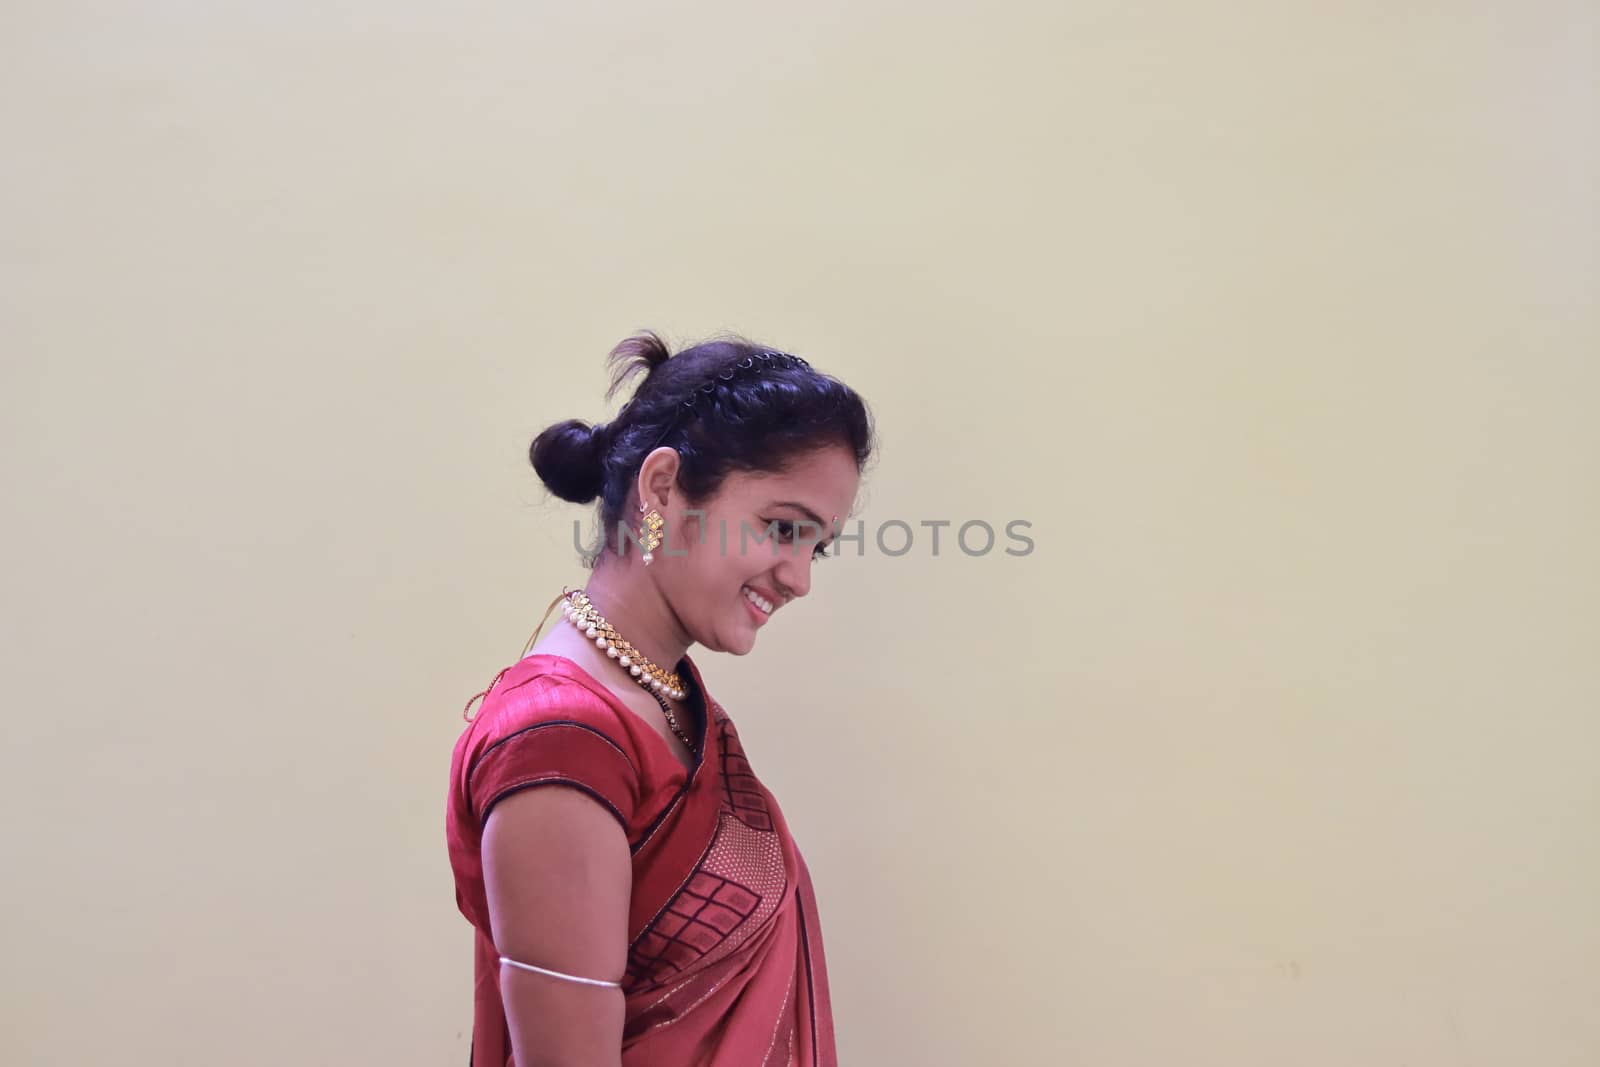 A model woman in a sari dressed in her customs and religion by 9500102400